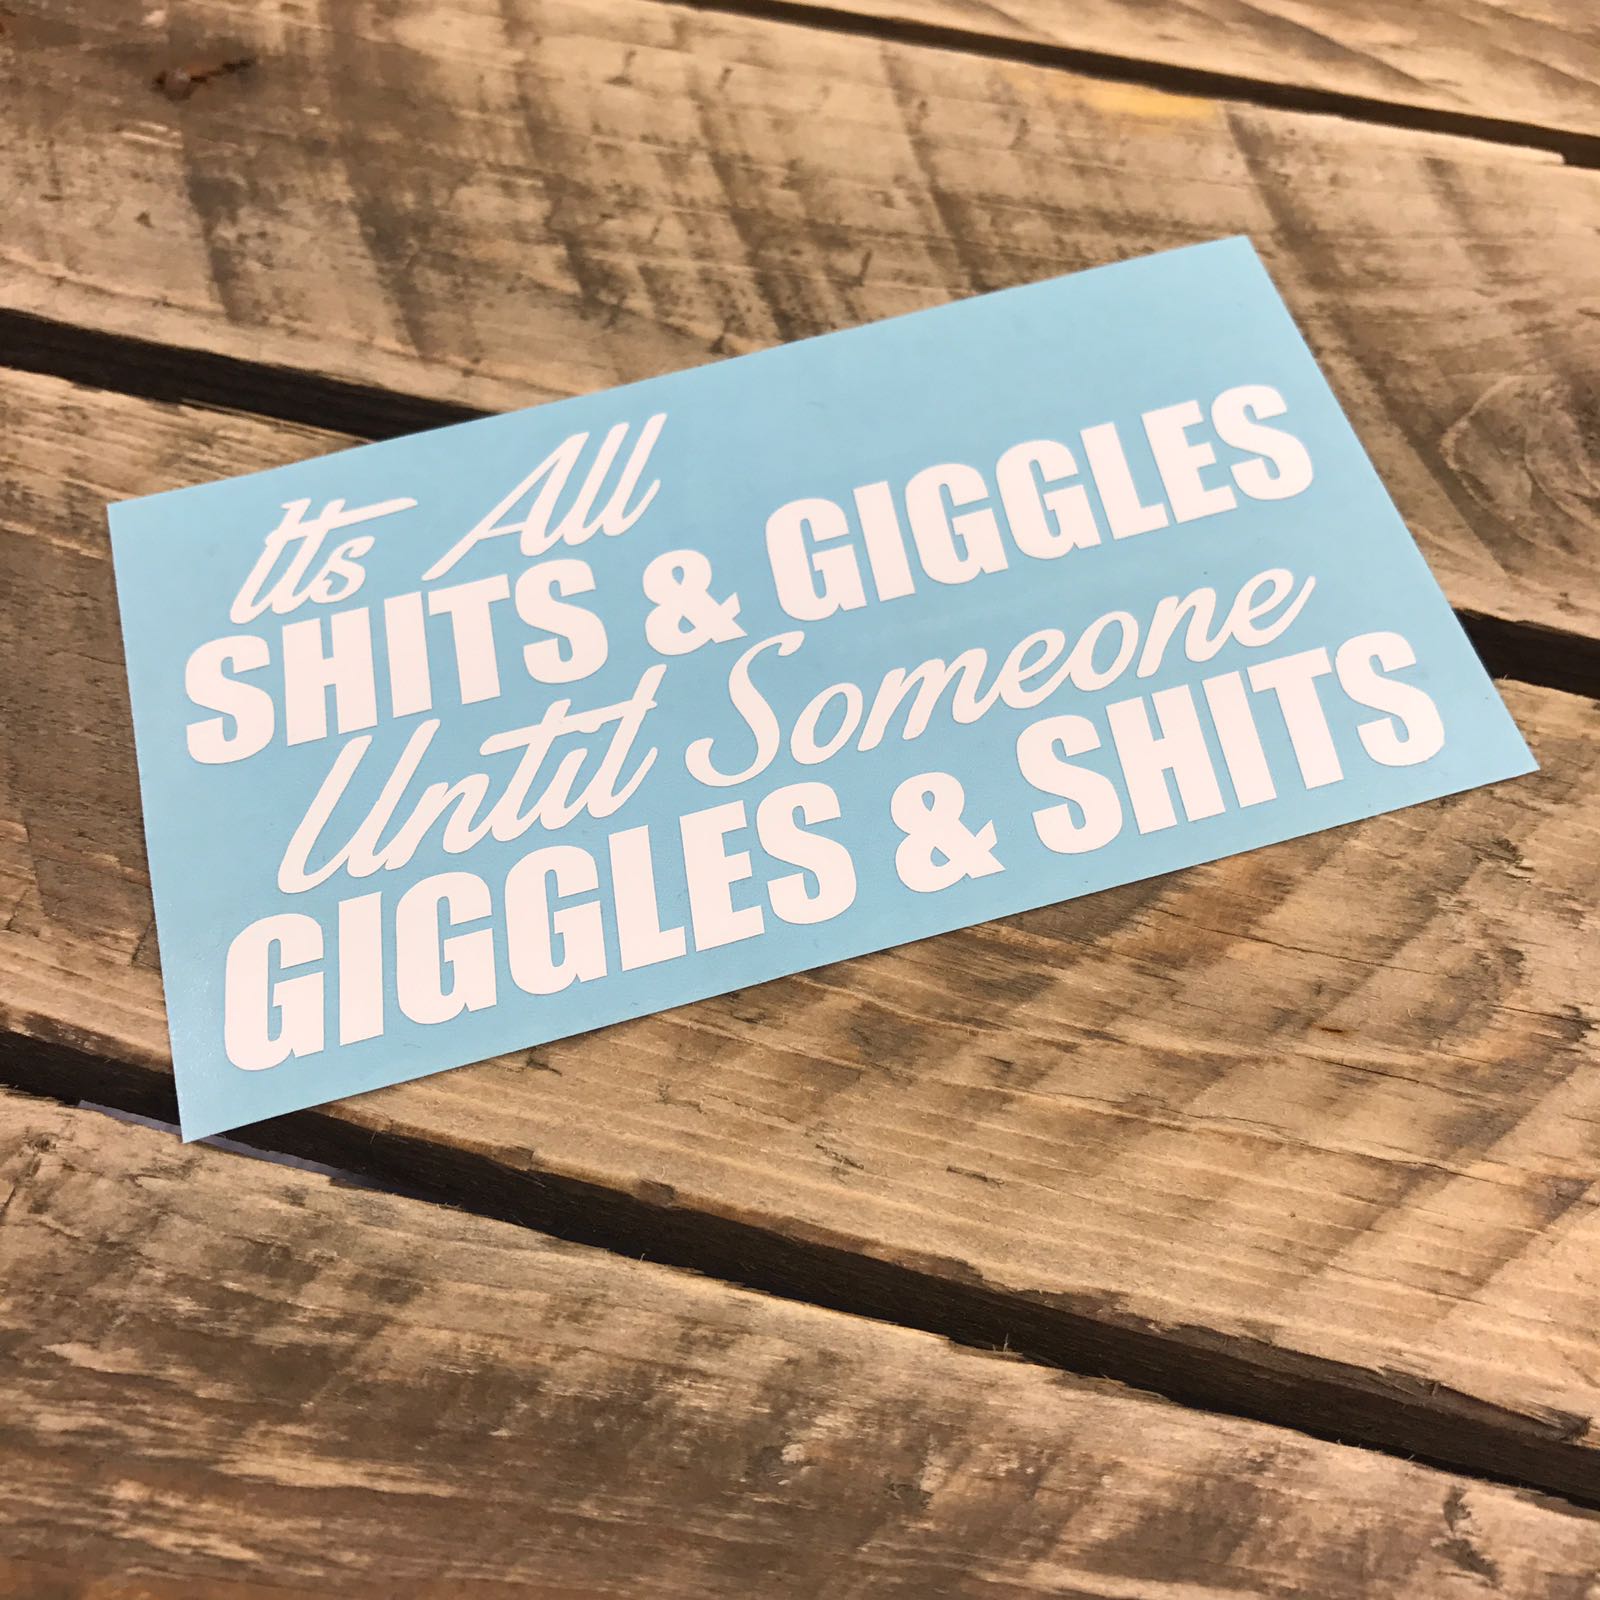 It's All Shits and Giggles